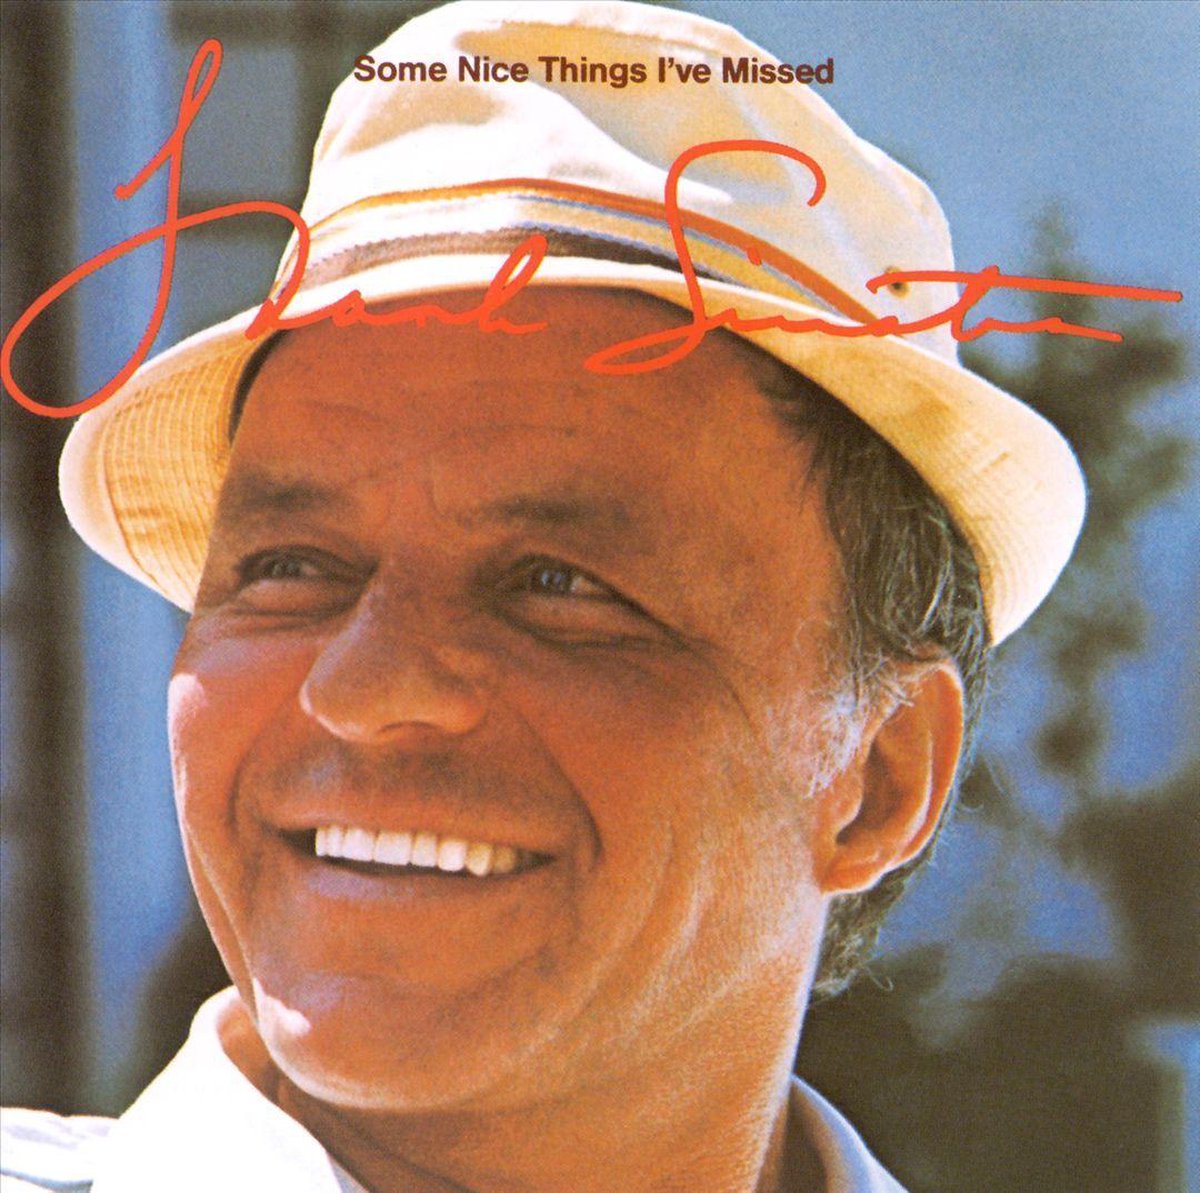 Some Nice Things I've Missed - Frank Sinatra